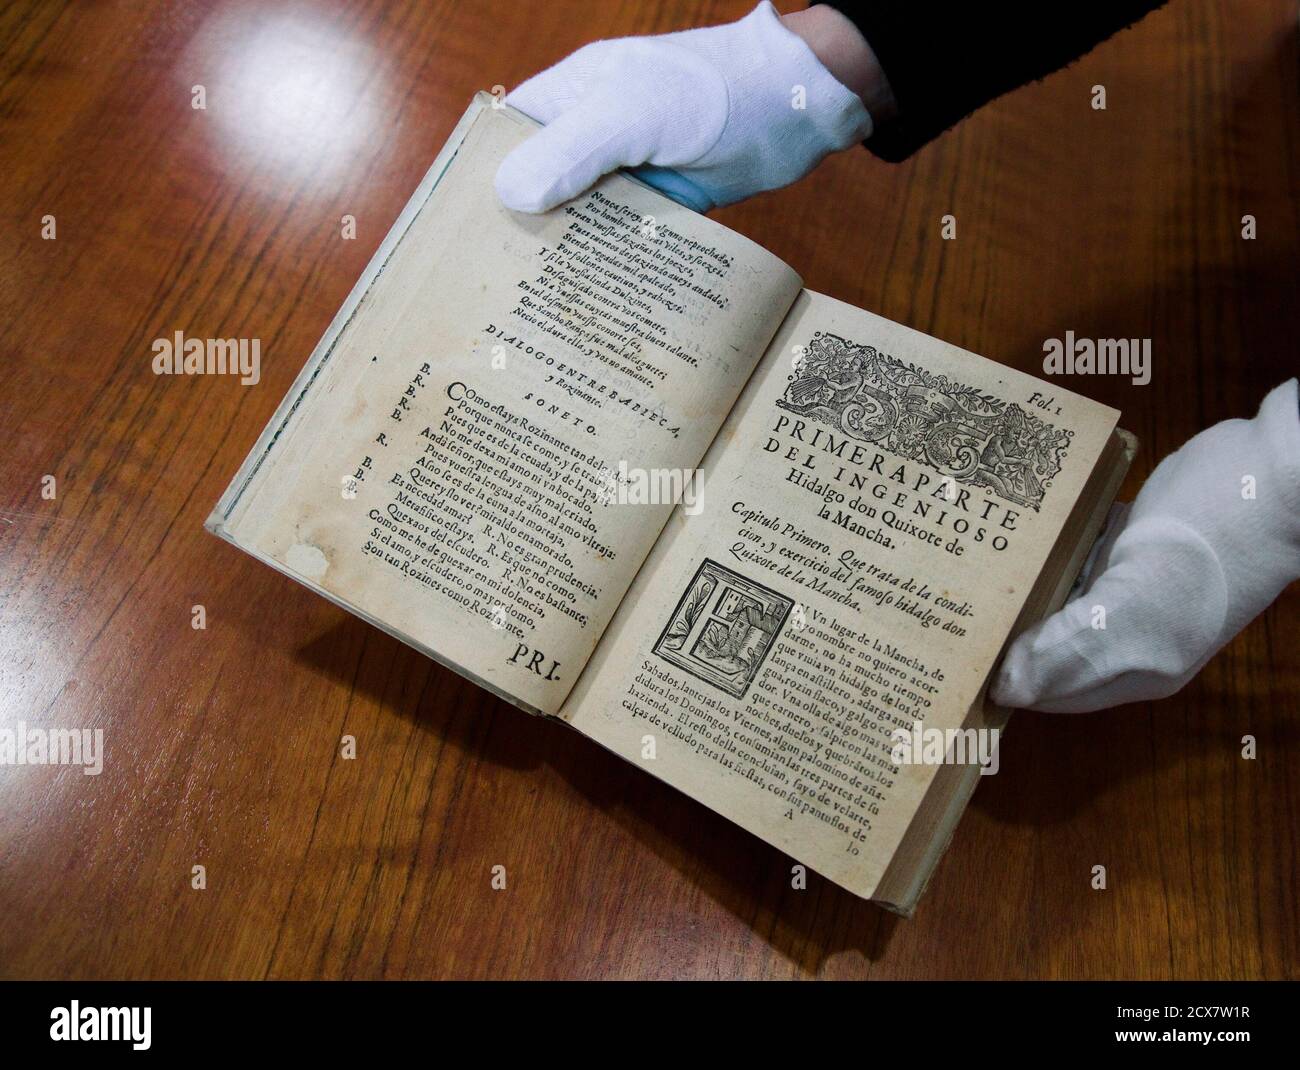 An edition dated in 1605 of Miguel de Cervantes famous novel 'Don Quixote'  is shown by a librarian at the National Library in Madrid March 10, 2014.  Historian Fernando Prado says he